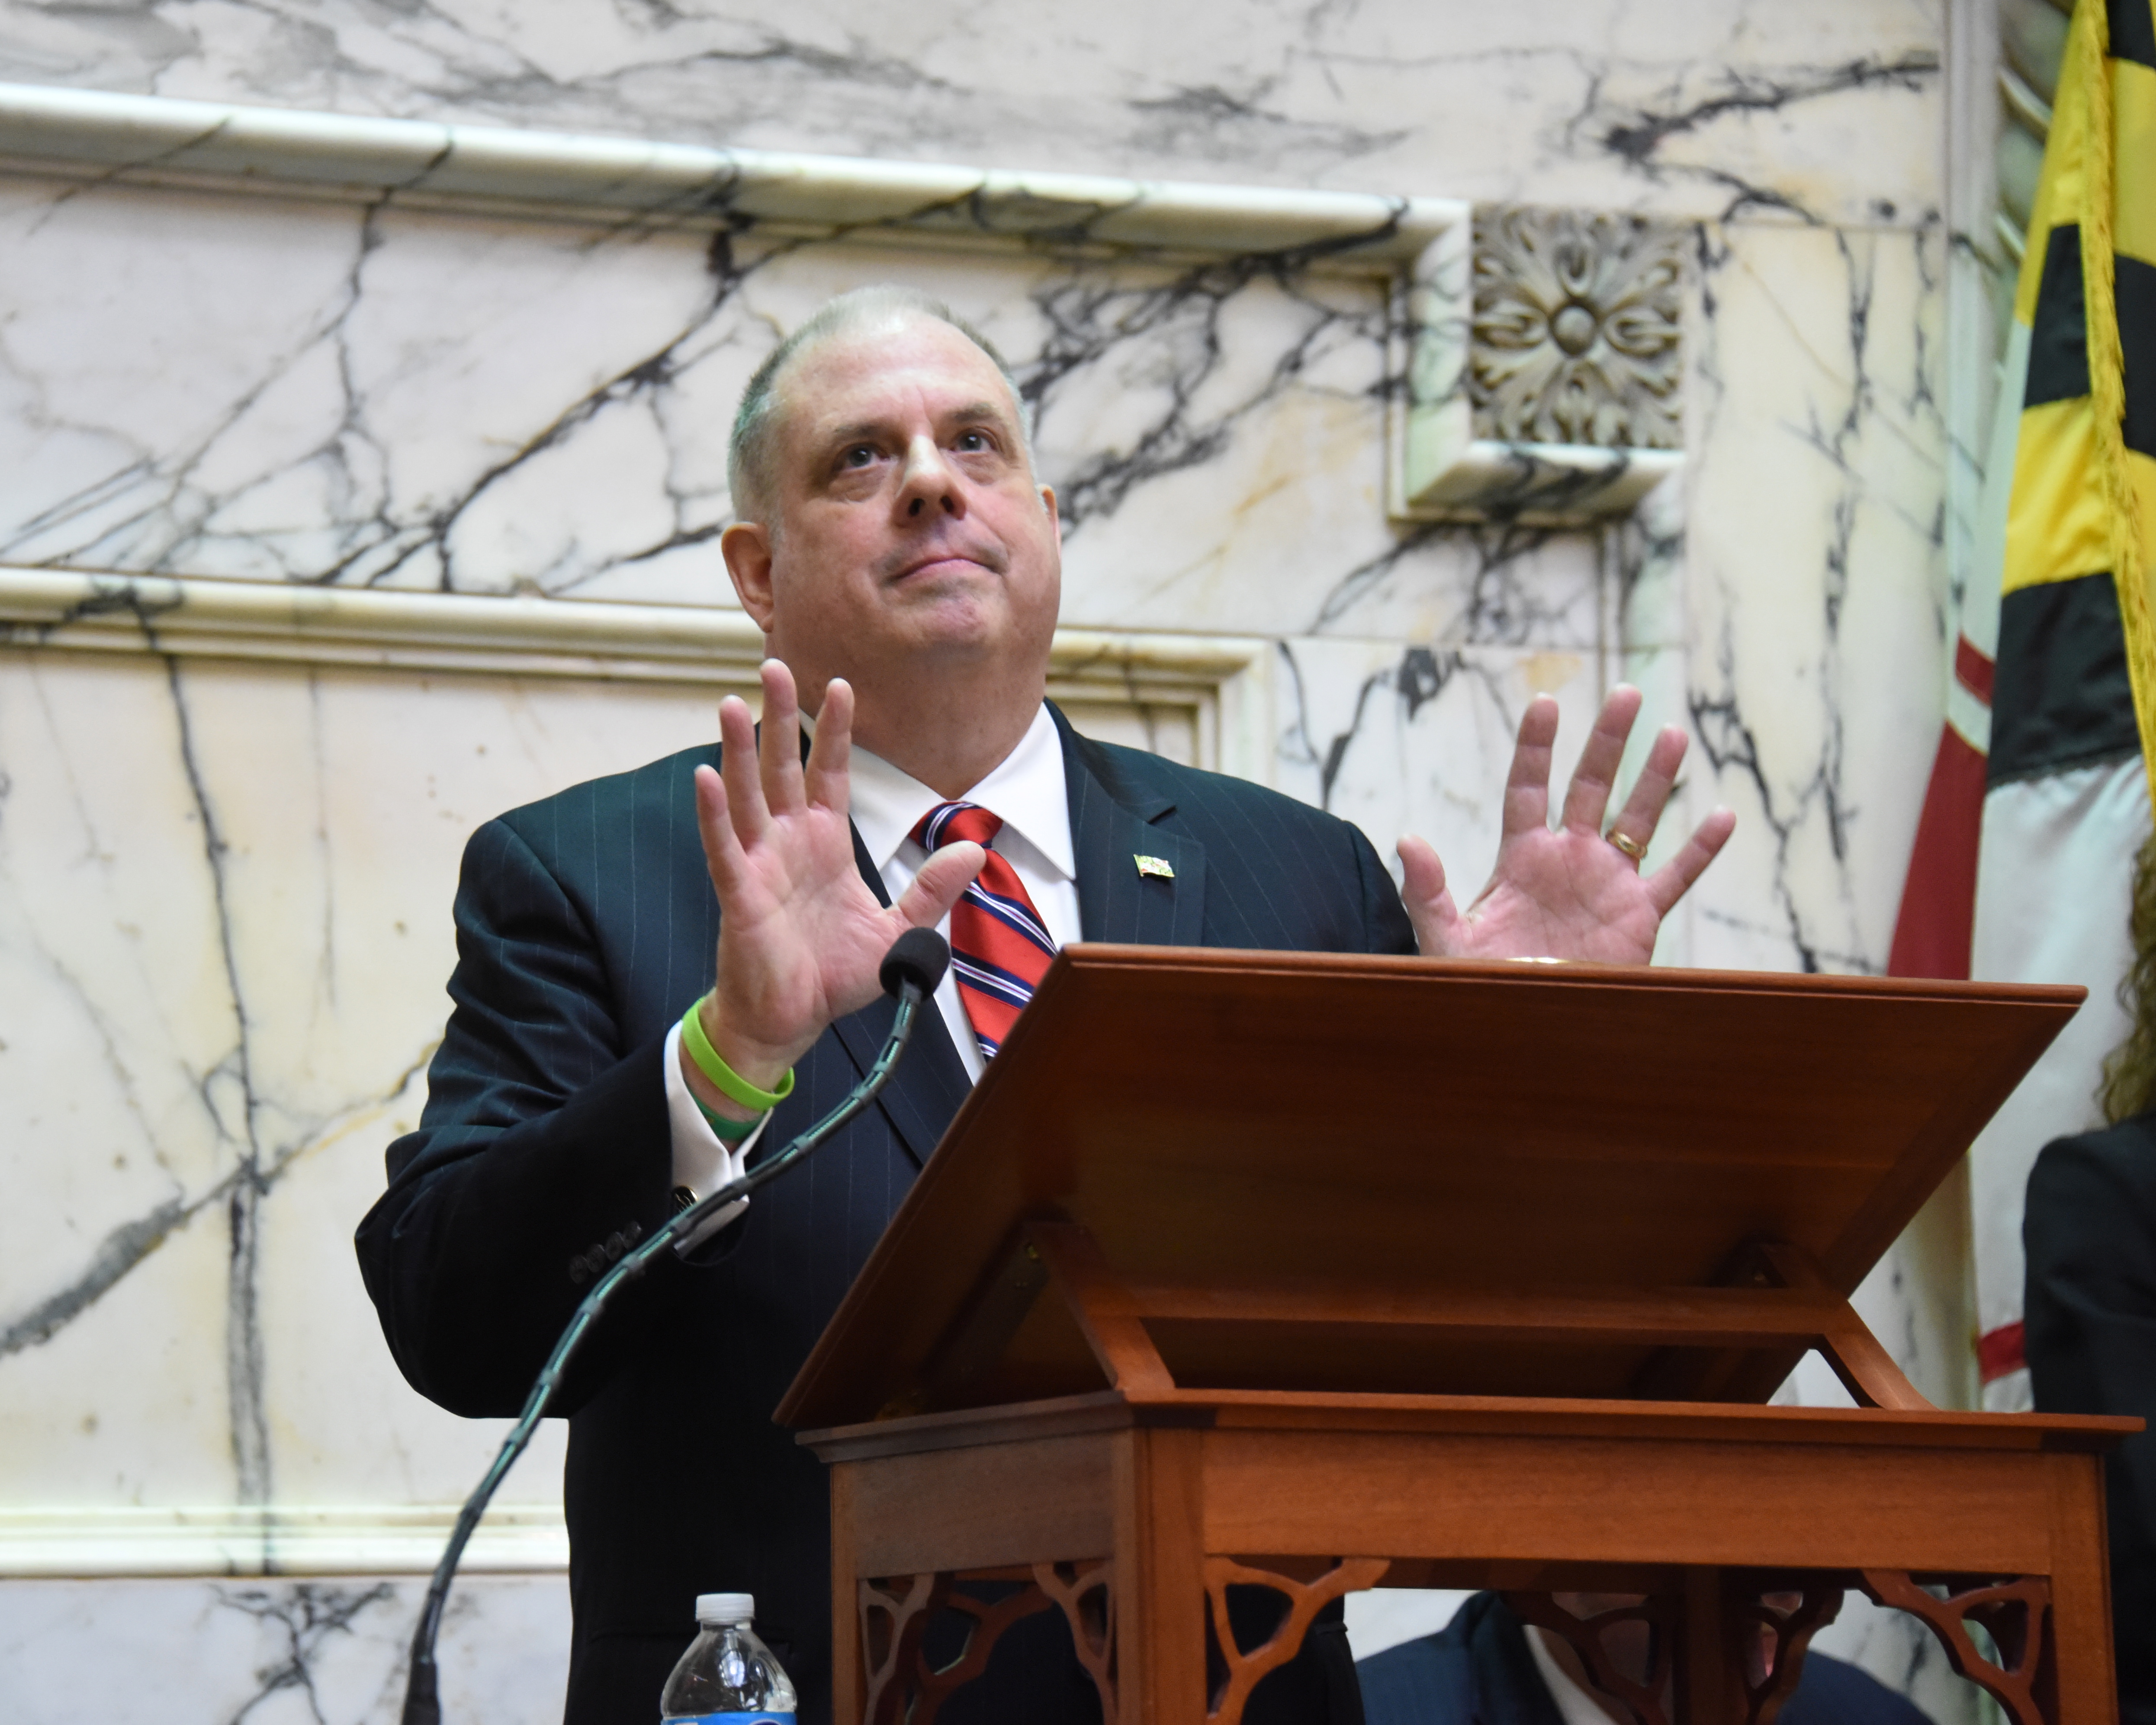 Hogan still riding high in latest poll, state headed in right direction